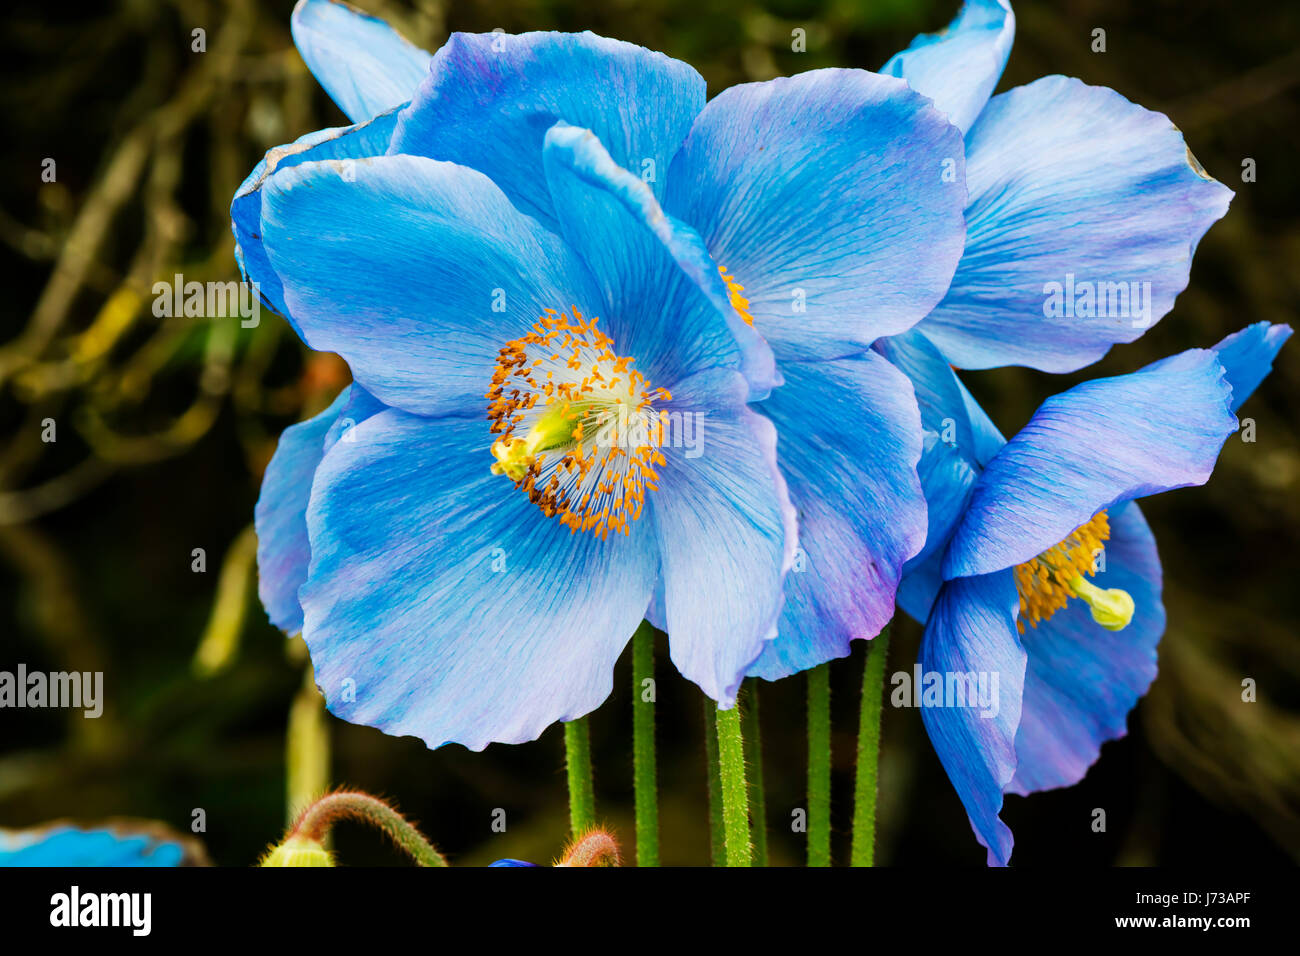 Large flowers of Meconopsis Himalayan blue poppy close-up. Stock Photo